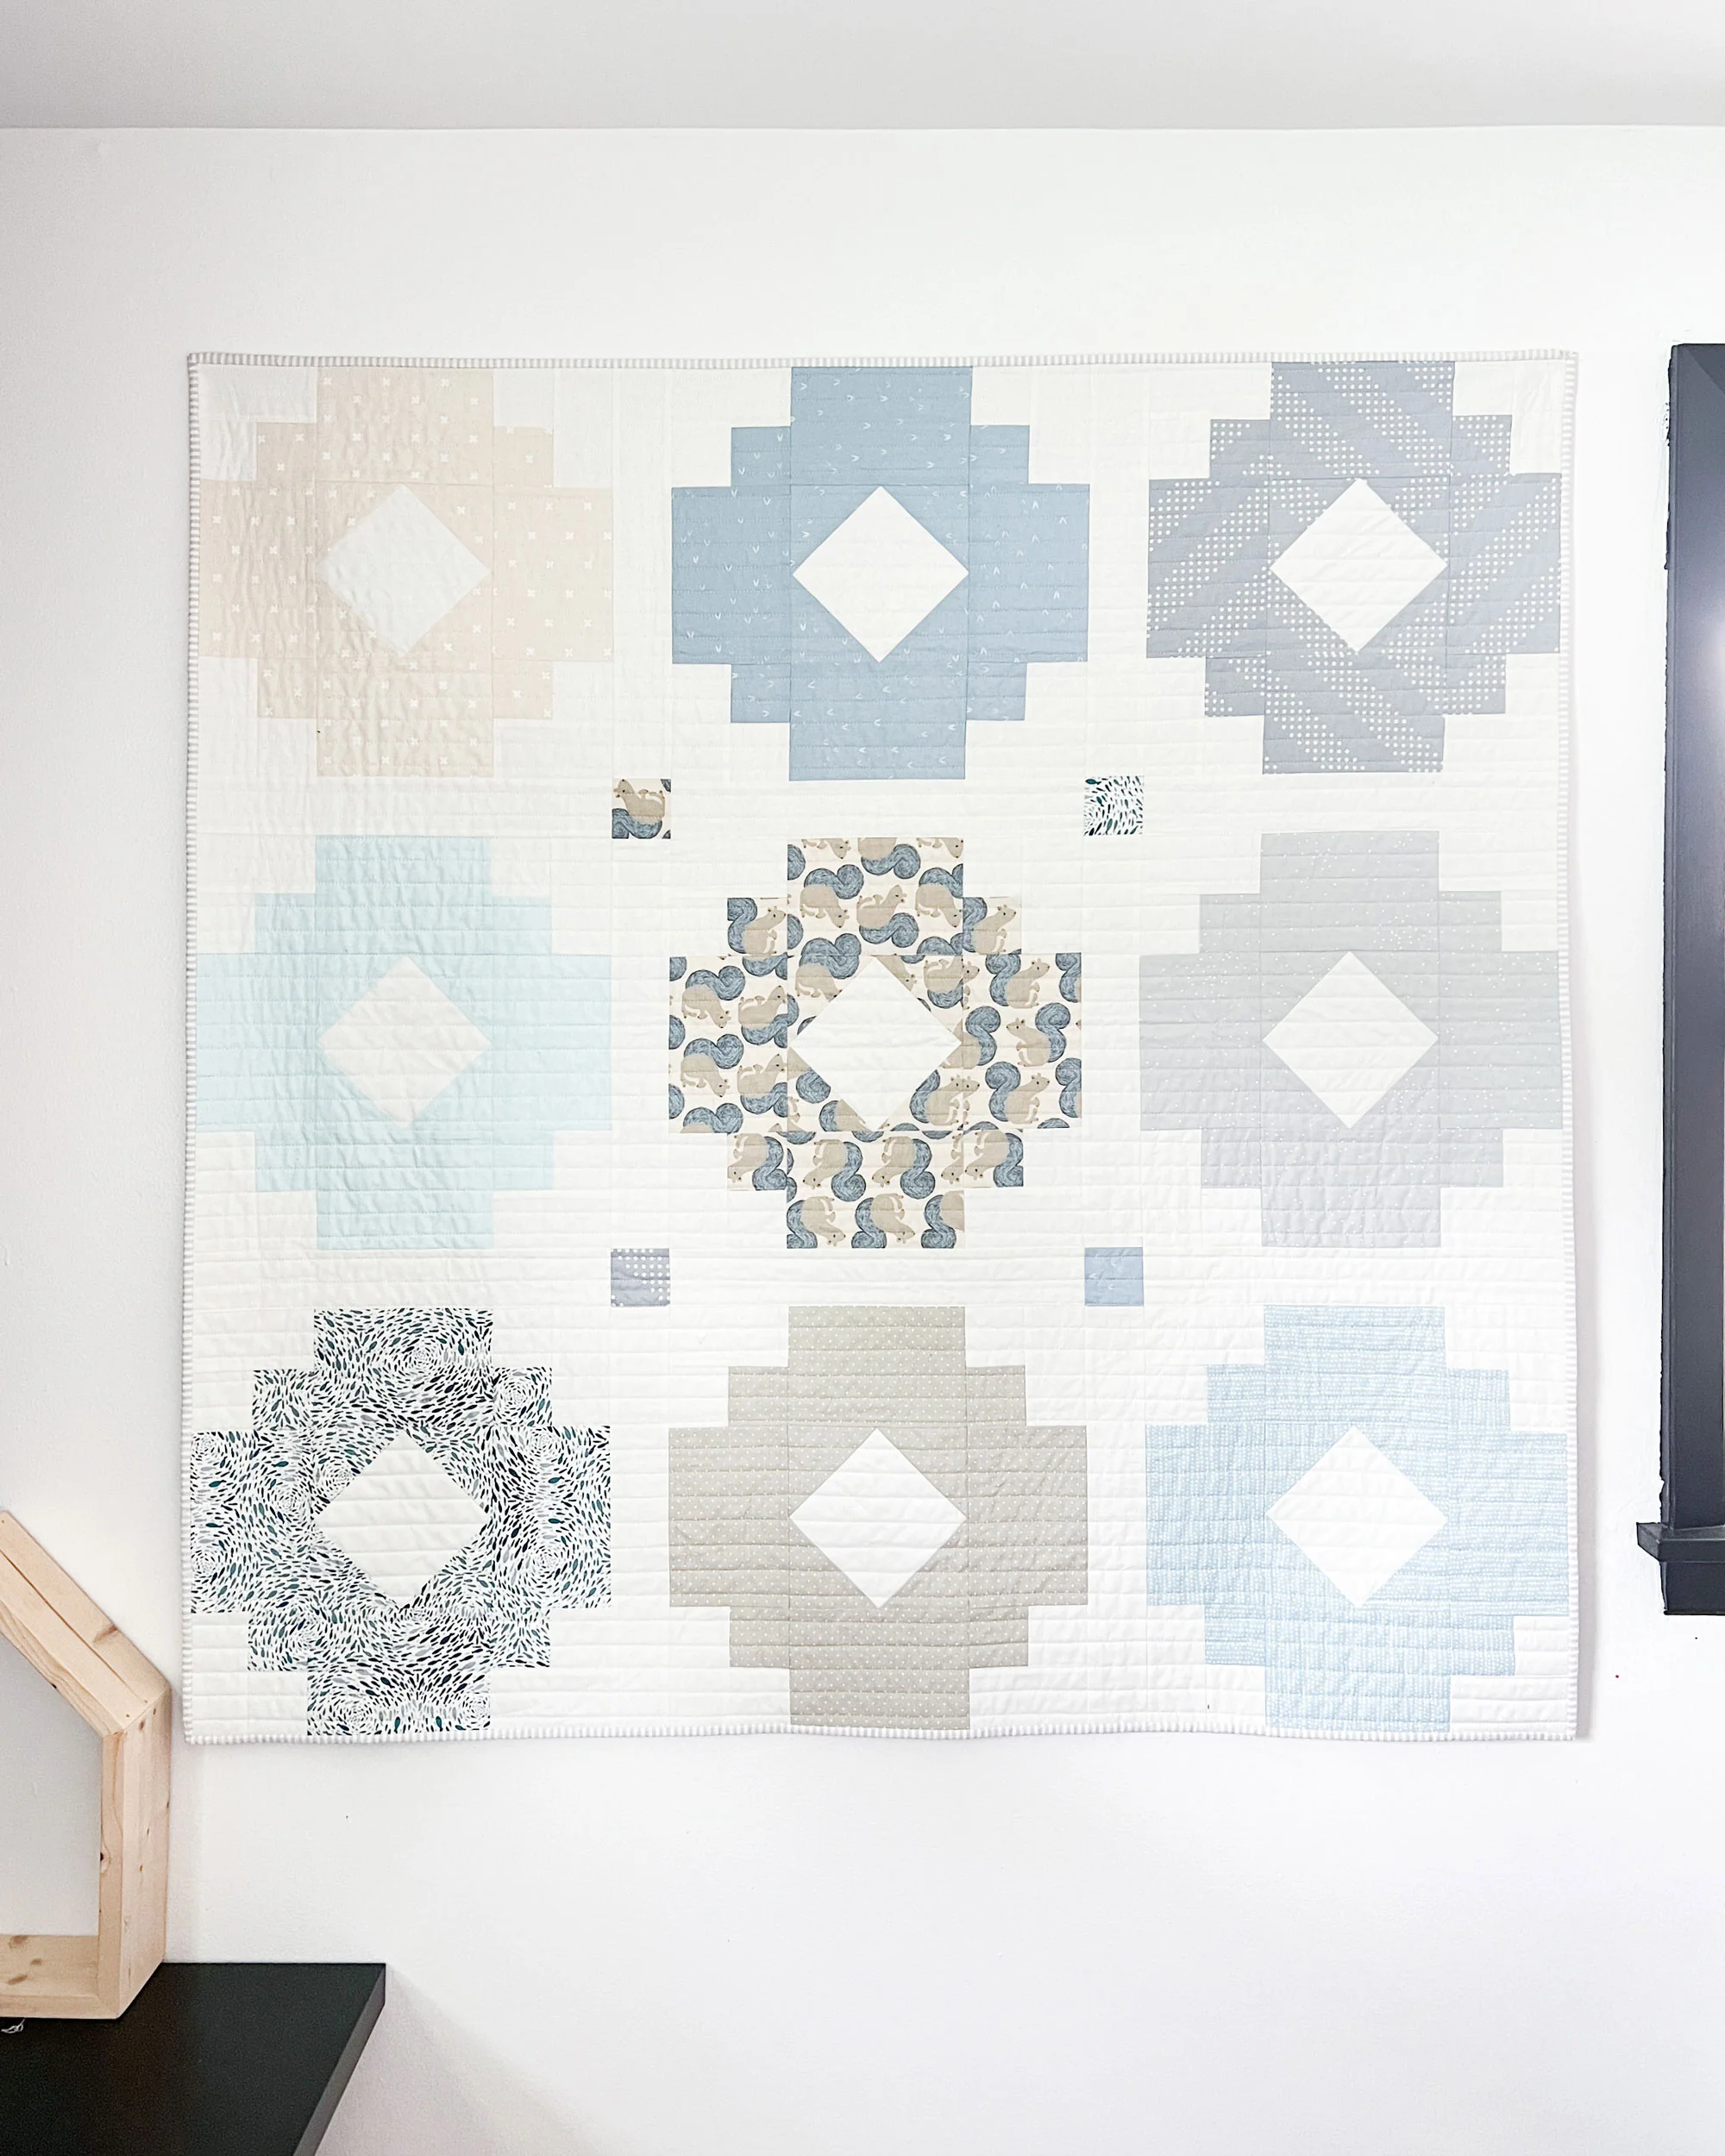 Free Baby Quilt Patterns - Classic, Modern Or Unique Designs ⋆ Hello Sewing